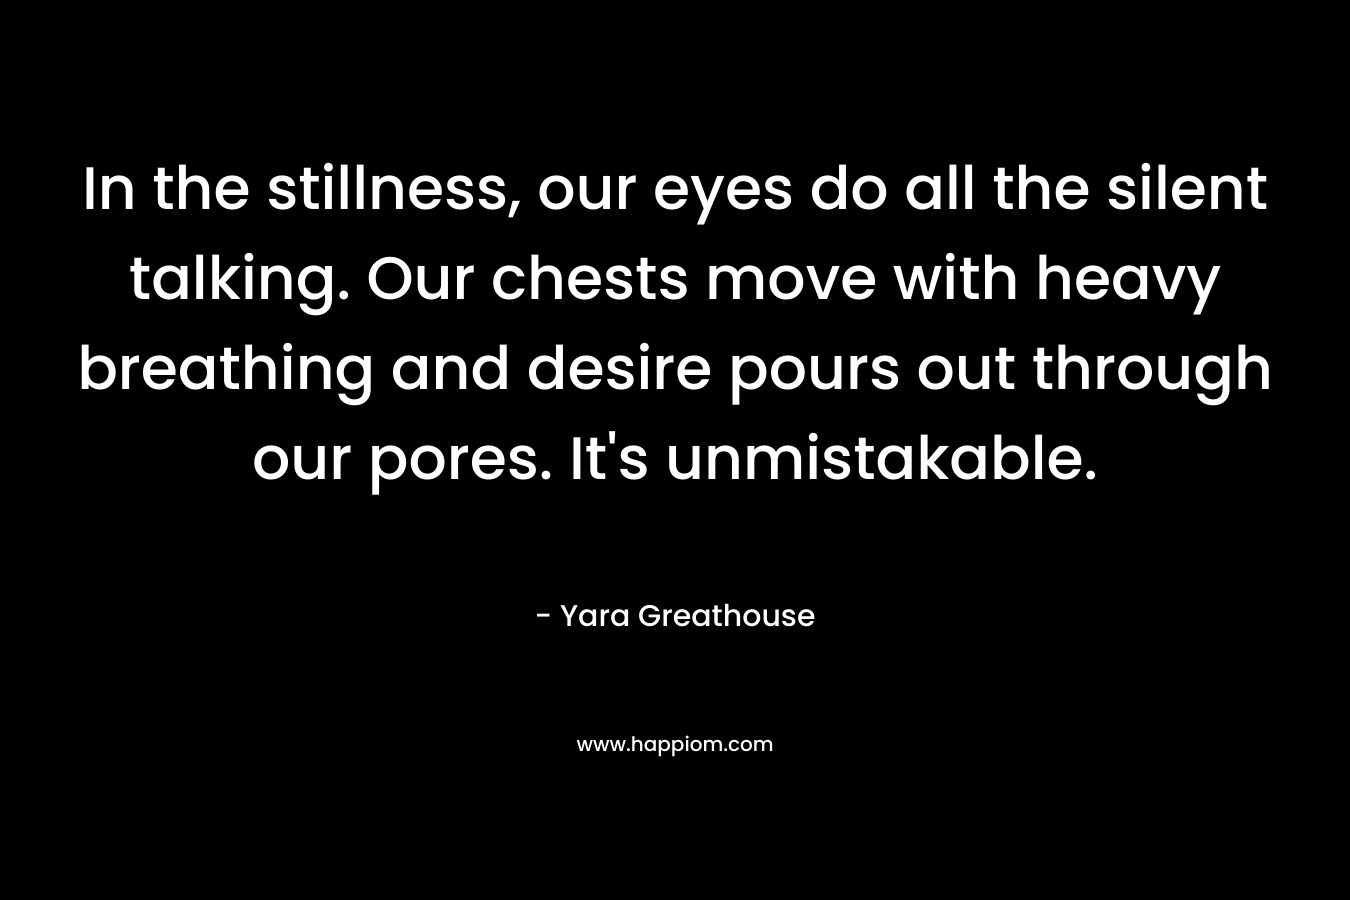 In the stillness, our eyes do all the silent talking. Our chests move with heavy breathing and desire pours out through our pores. It's unmistakable.